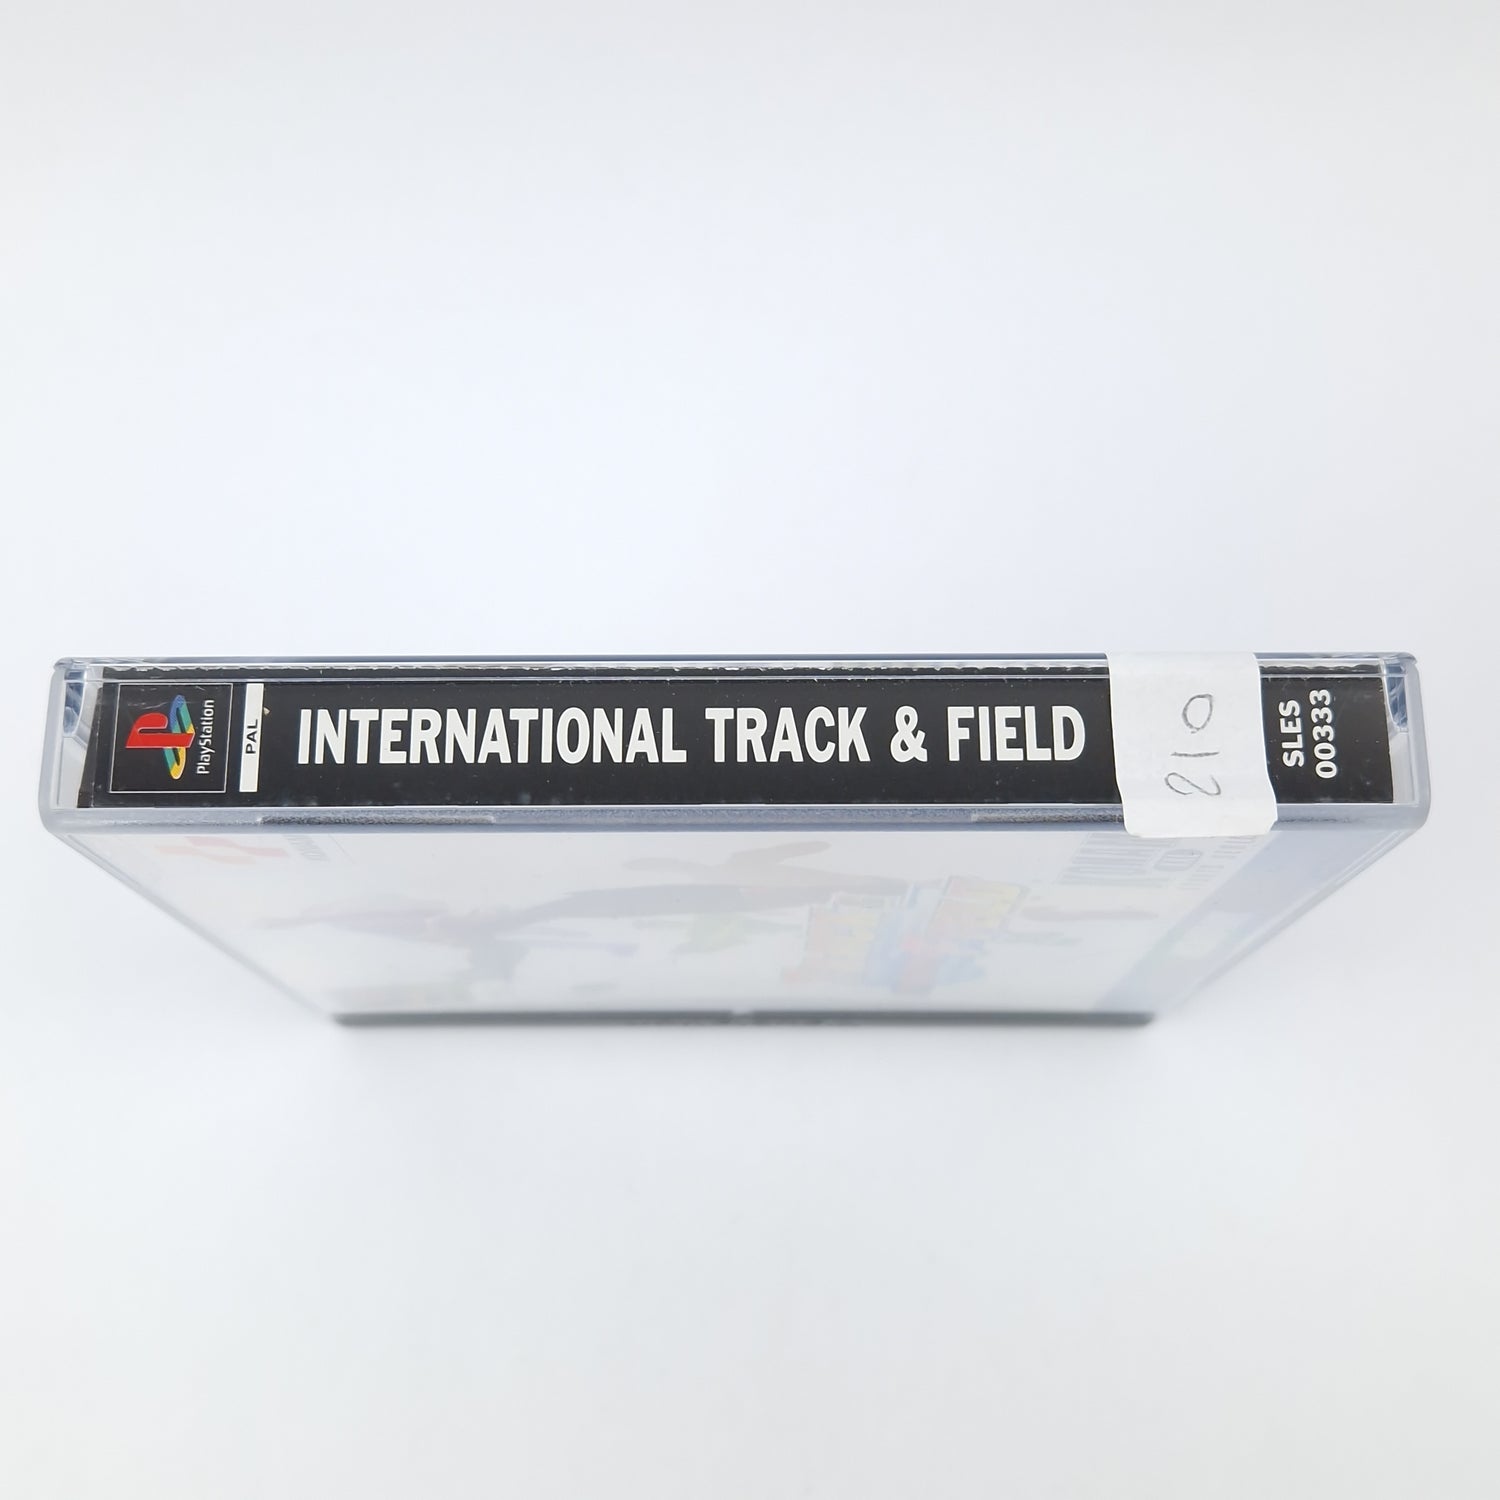 Playstation 1 Game: Track & Field International CD Instructions OVP SONY PS1 PSX